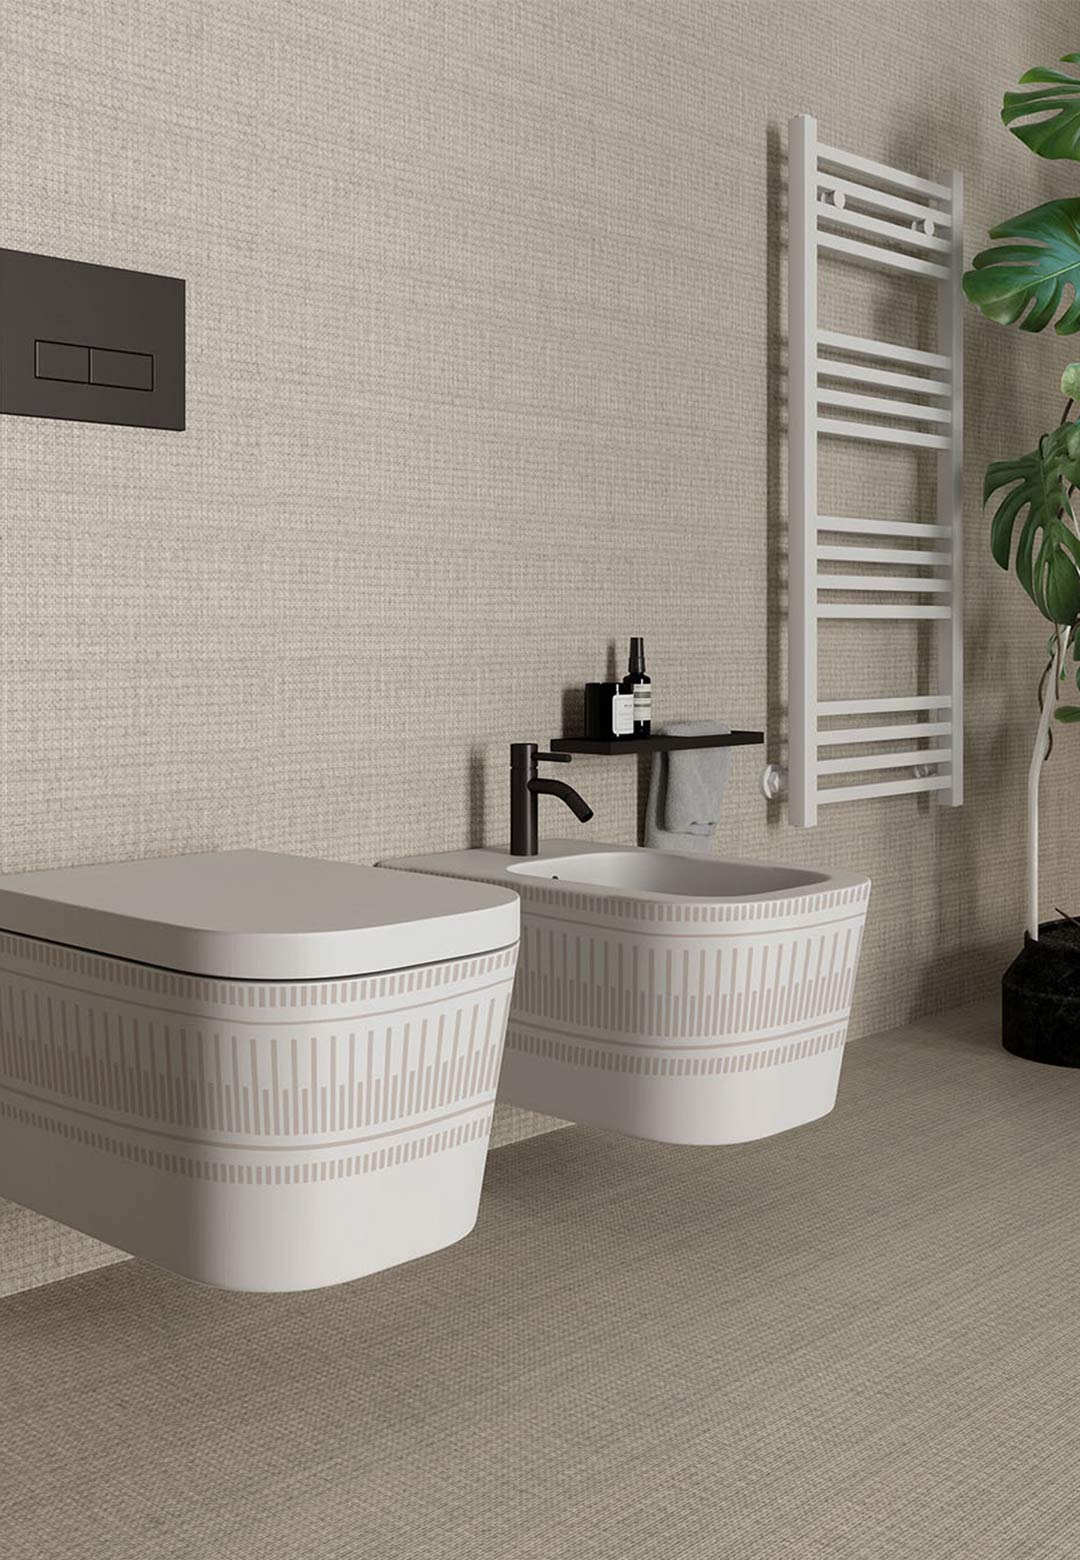 Inkiostro Bianco transforms the bathroom concept with its new 'InkBath System'